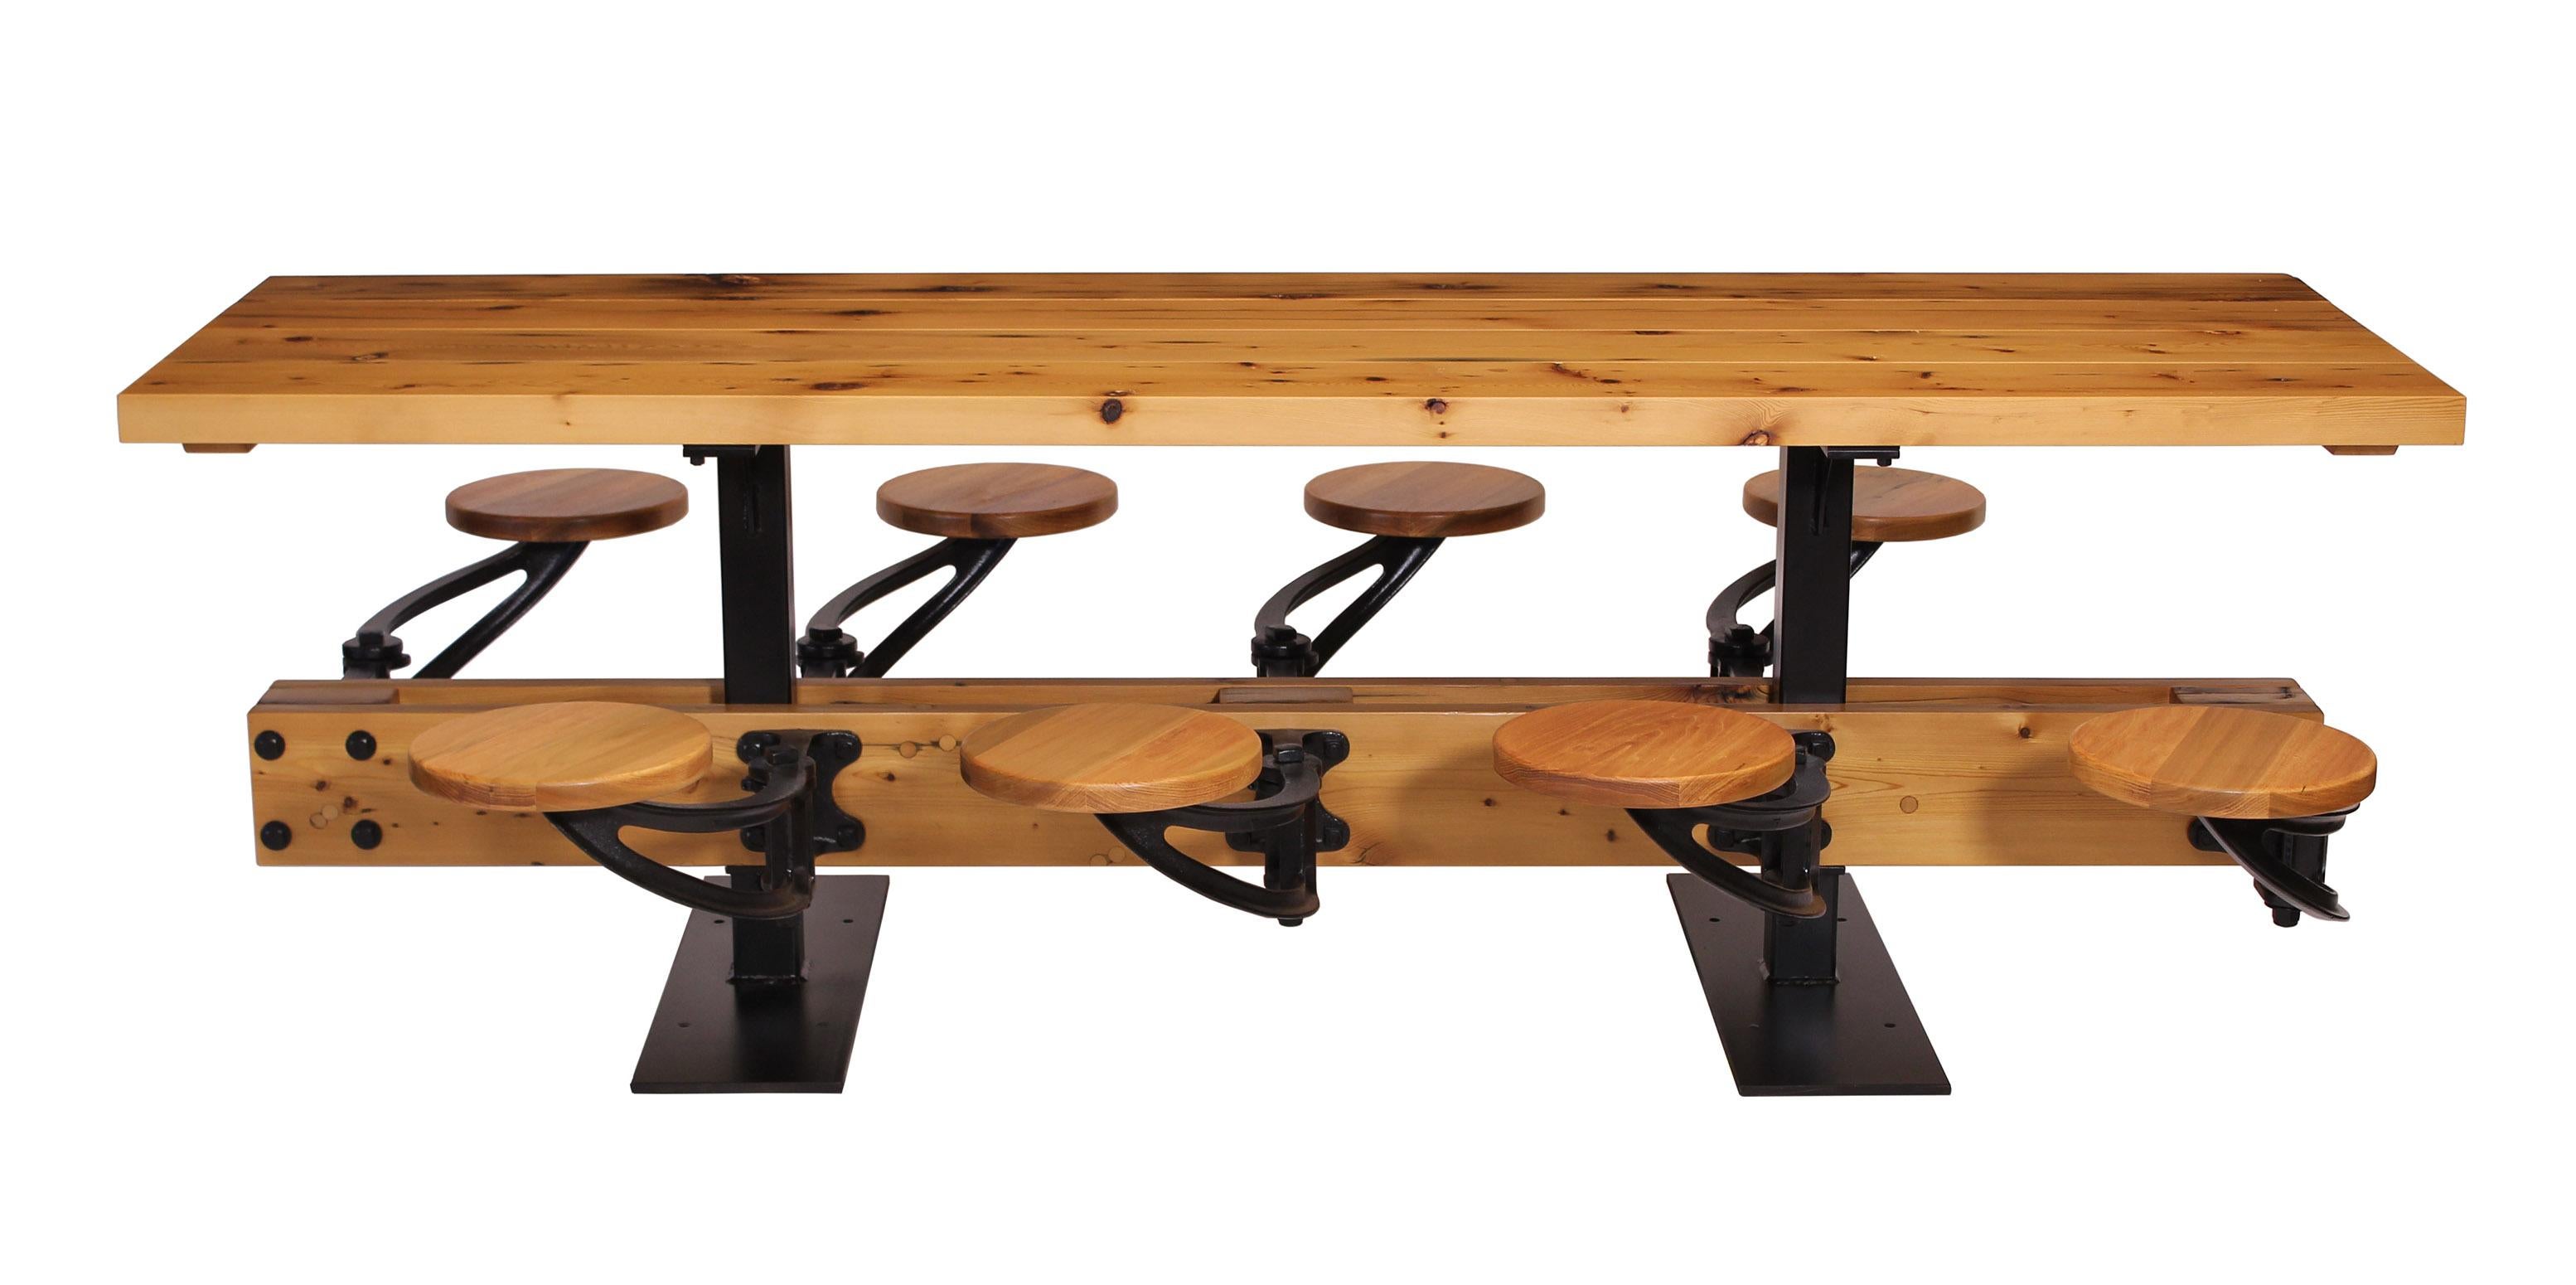 Library / Communal / Industrial dining table with reclaimed pine (douglas fir) and cast iron swing-out seats. Can be built with four to twenty four (or more) seats. Tables can be linked together. Handcrafted steel pedestals are fitted with mounting